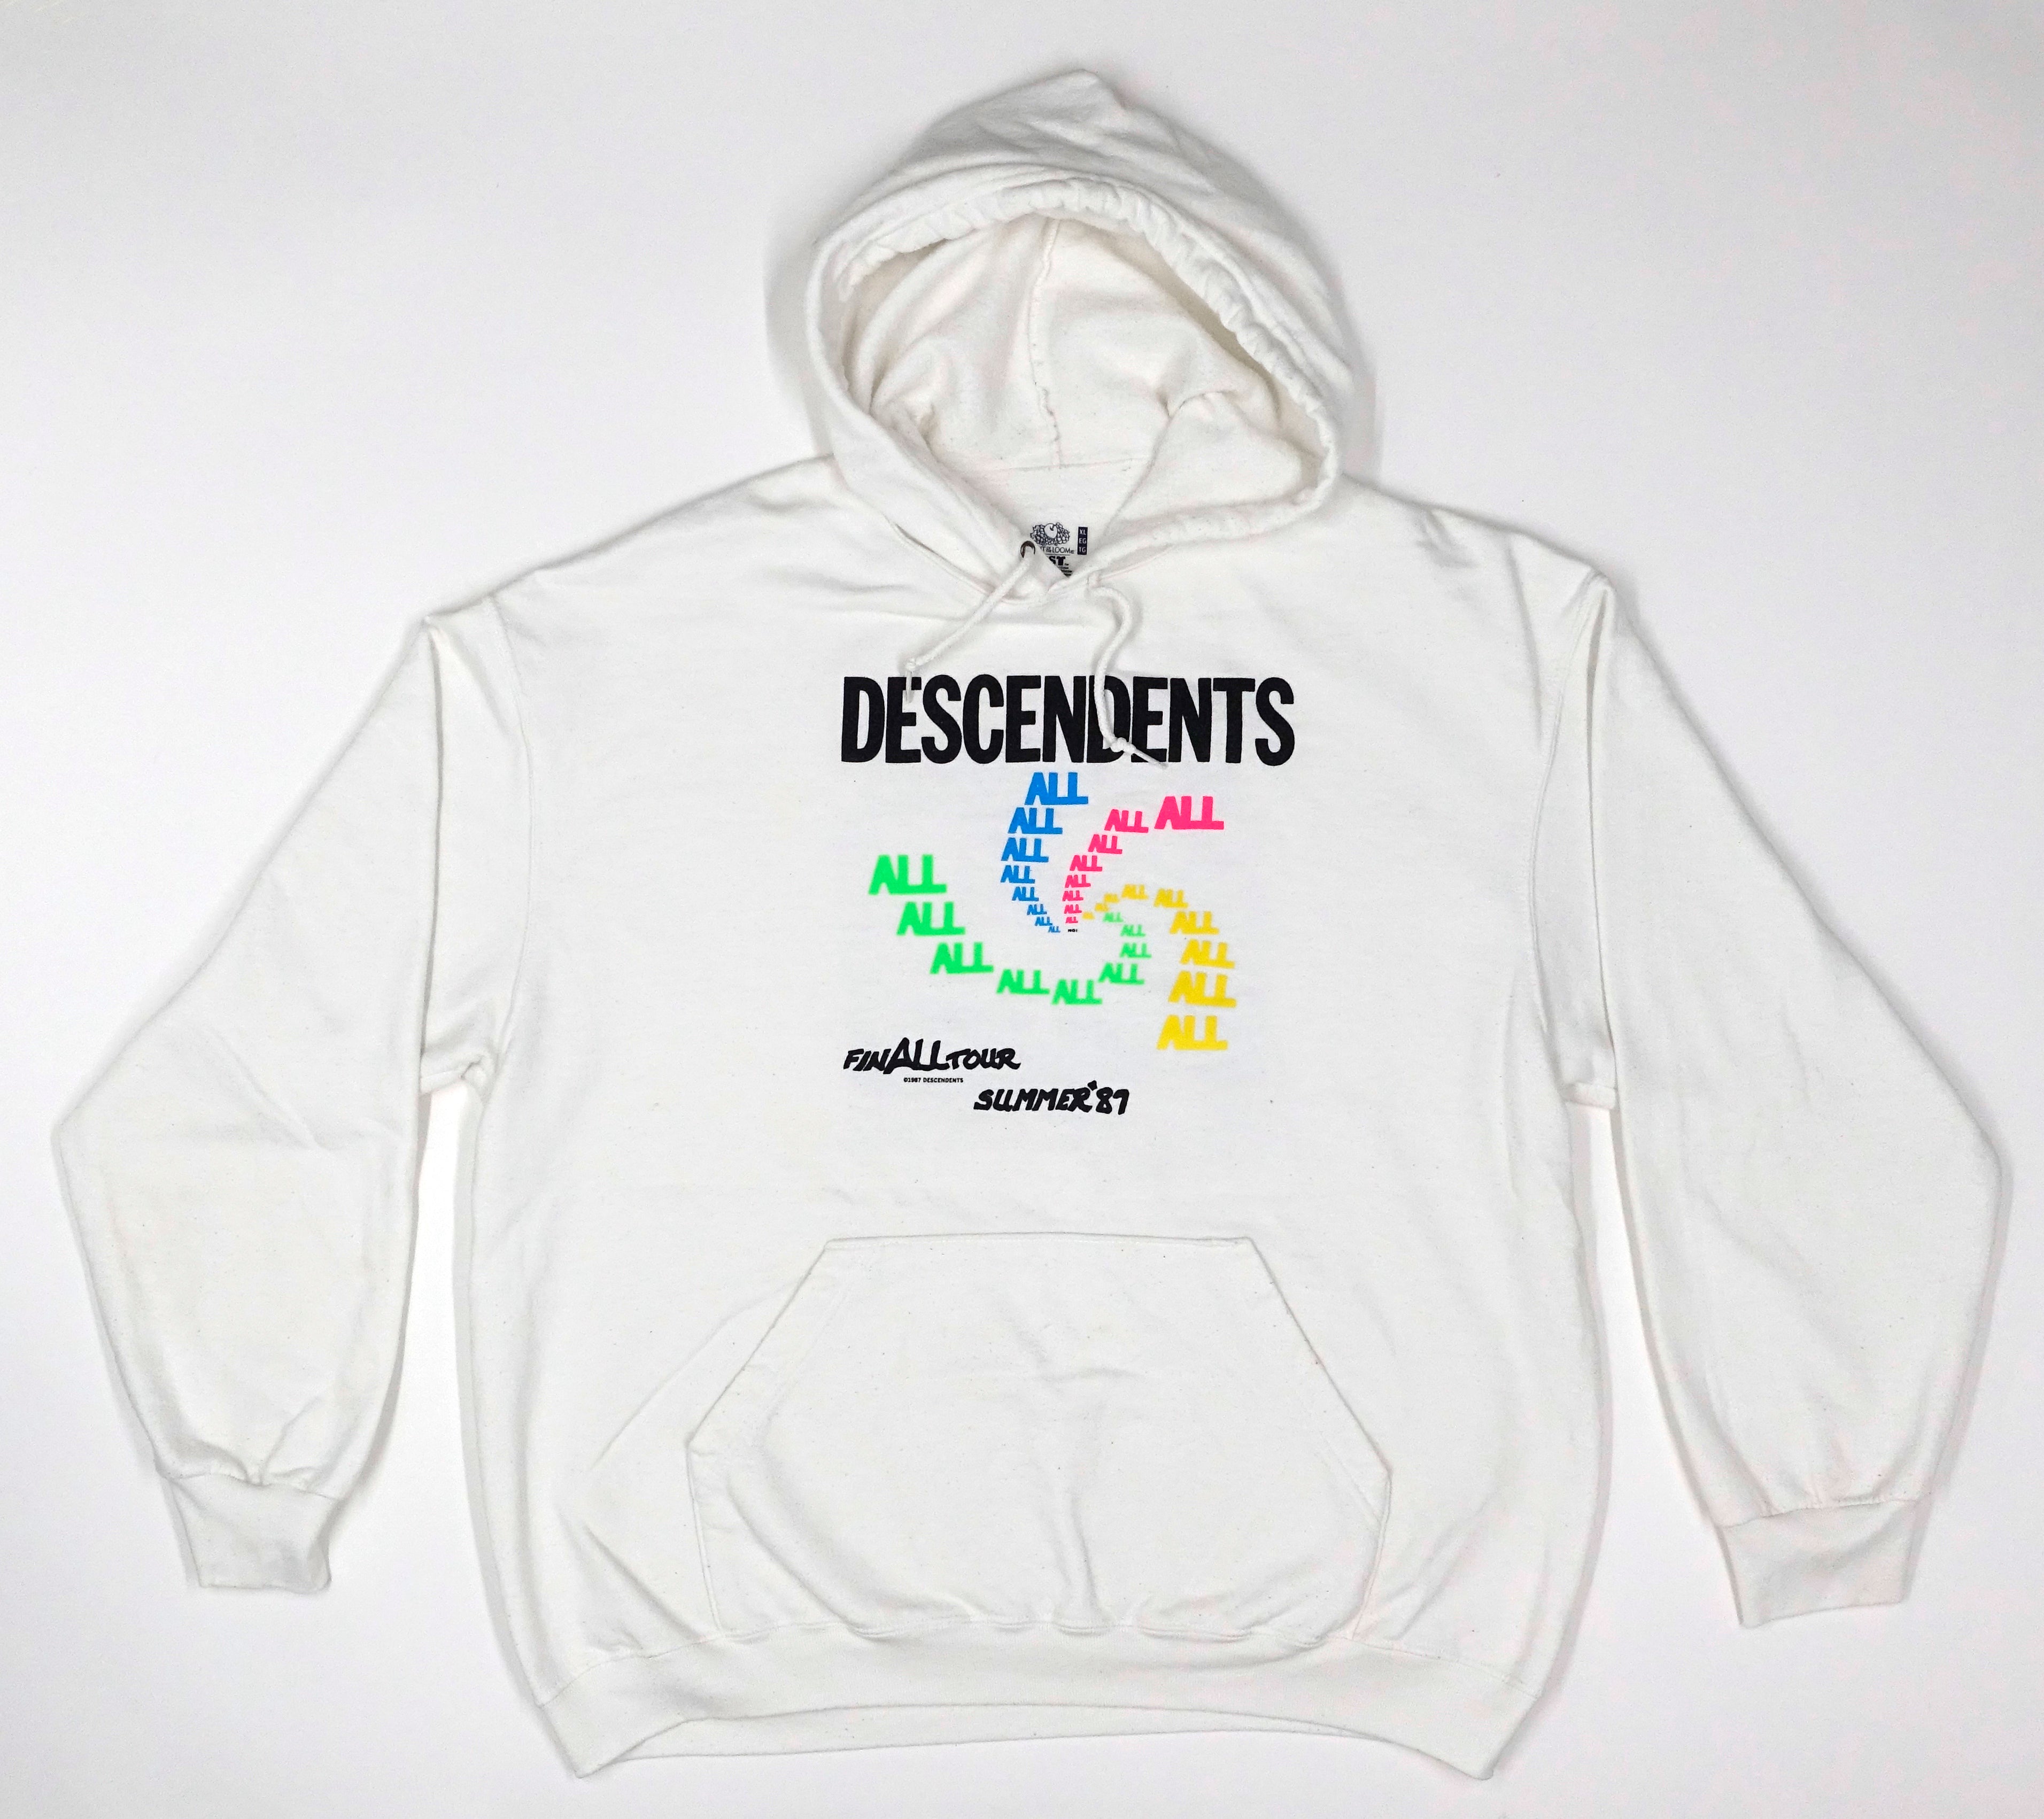 Descendents - ALL 1987 FinALL Tour (Bootleg By Me) Hooded Sweat Shirt Size XL